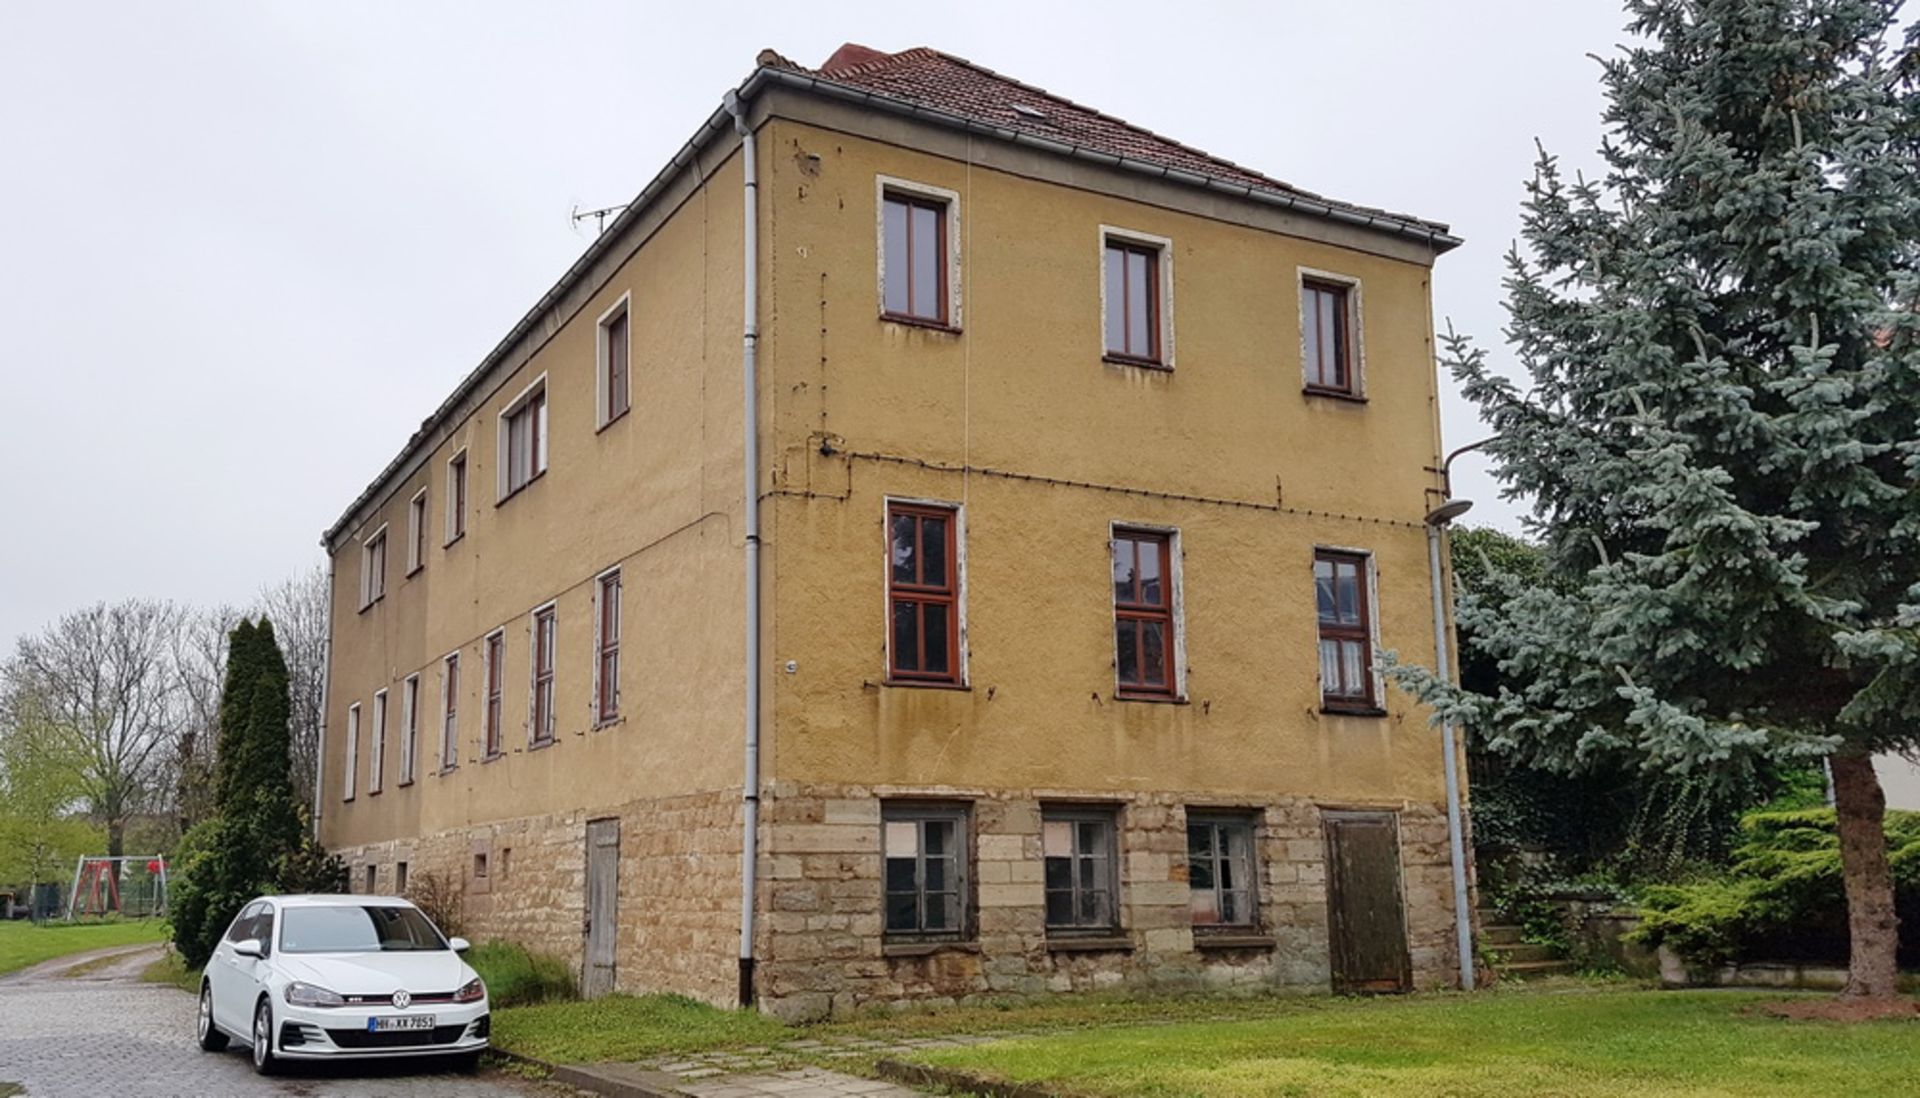 LARGE HOUSING BLOCK IN HORNSOMMEM, GERMANY - READY TO MOVE INTO - Image 21 of 91